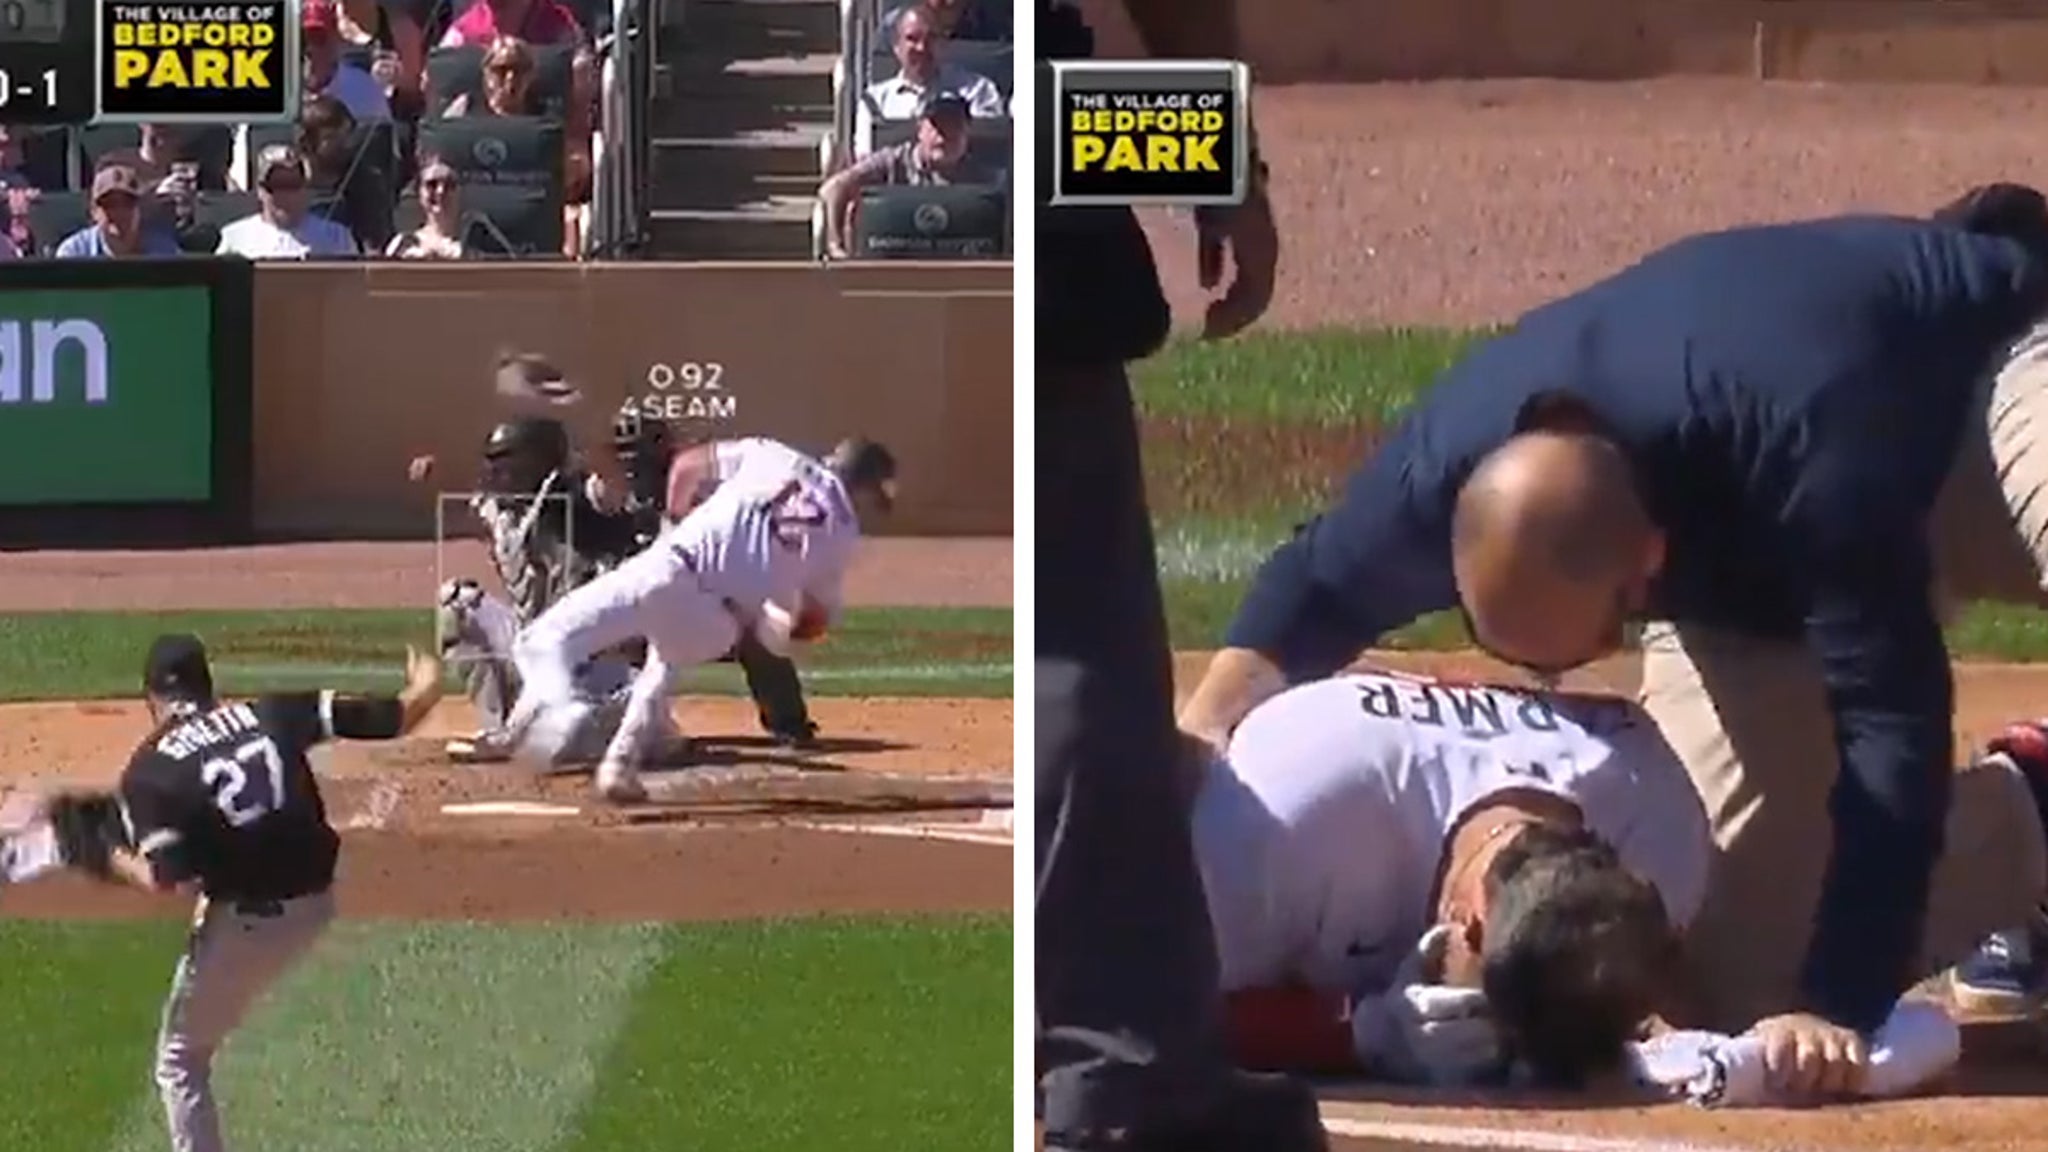 Kyle Farmer INJURED AFTER HIT-BY-PITCH TO FACE!